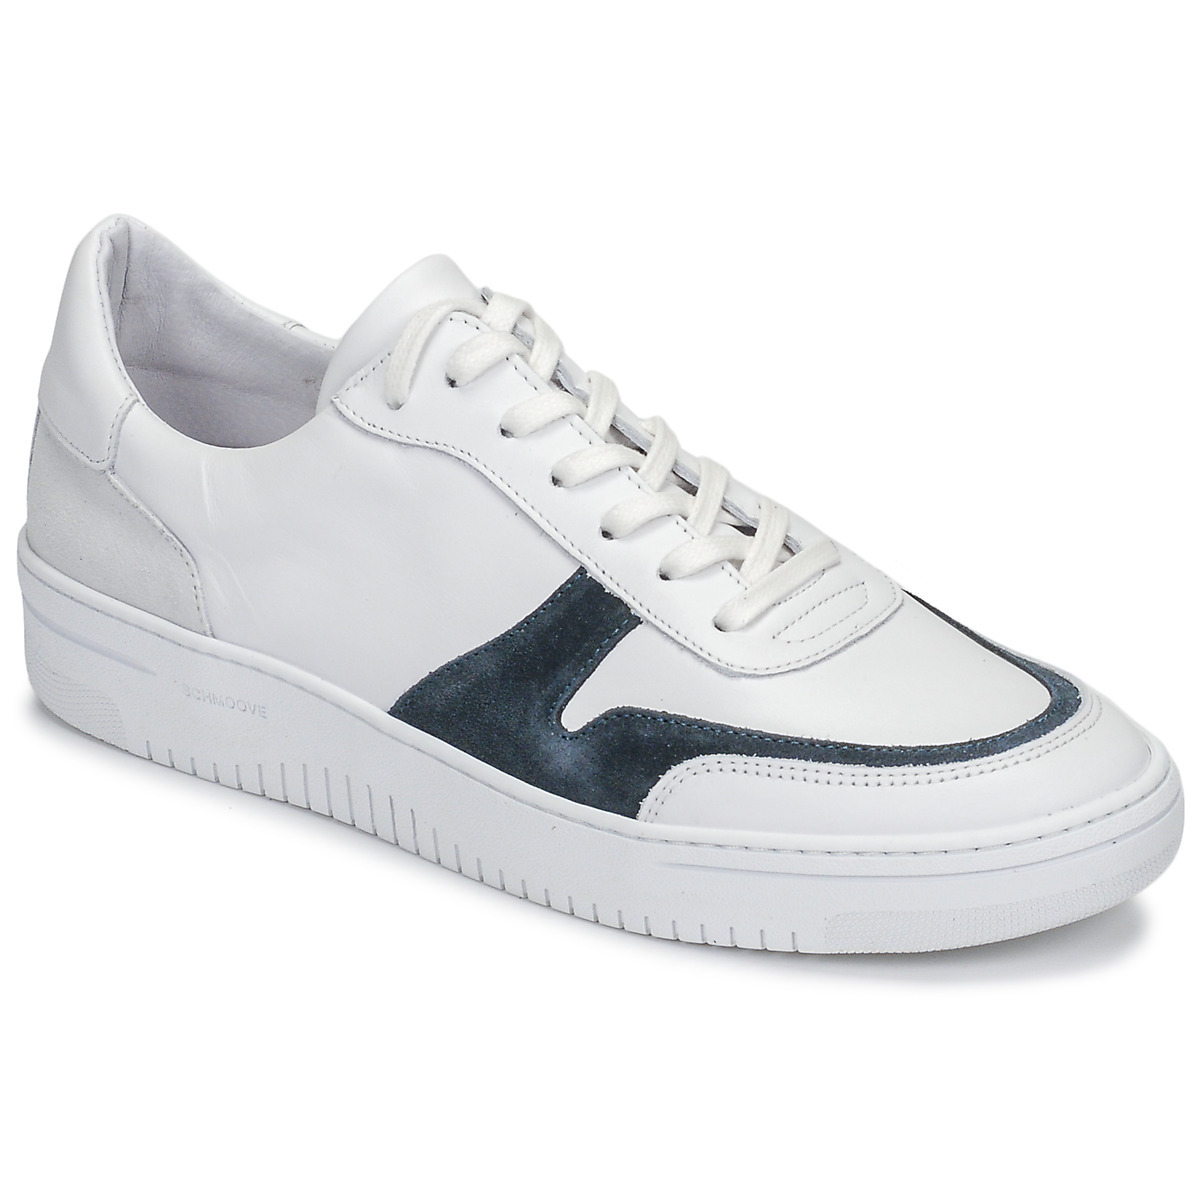 Gents Sneakers in White from Spartoo GOOFASH